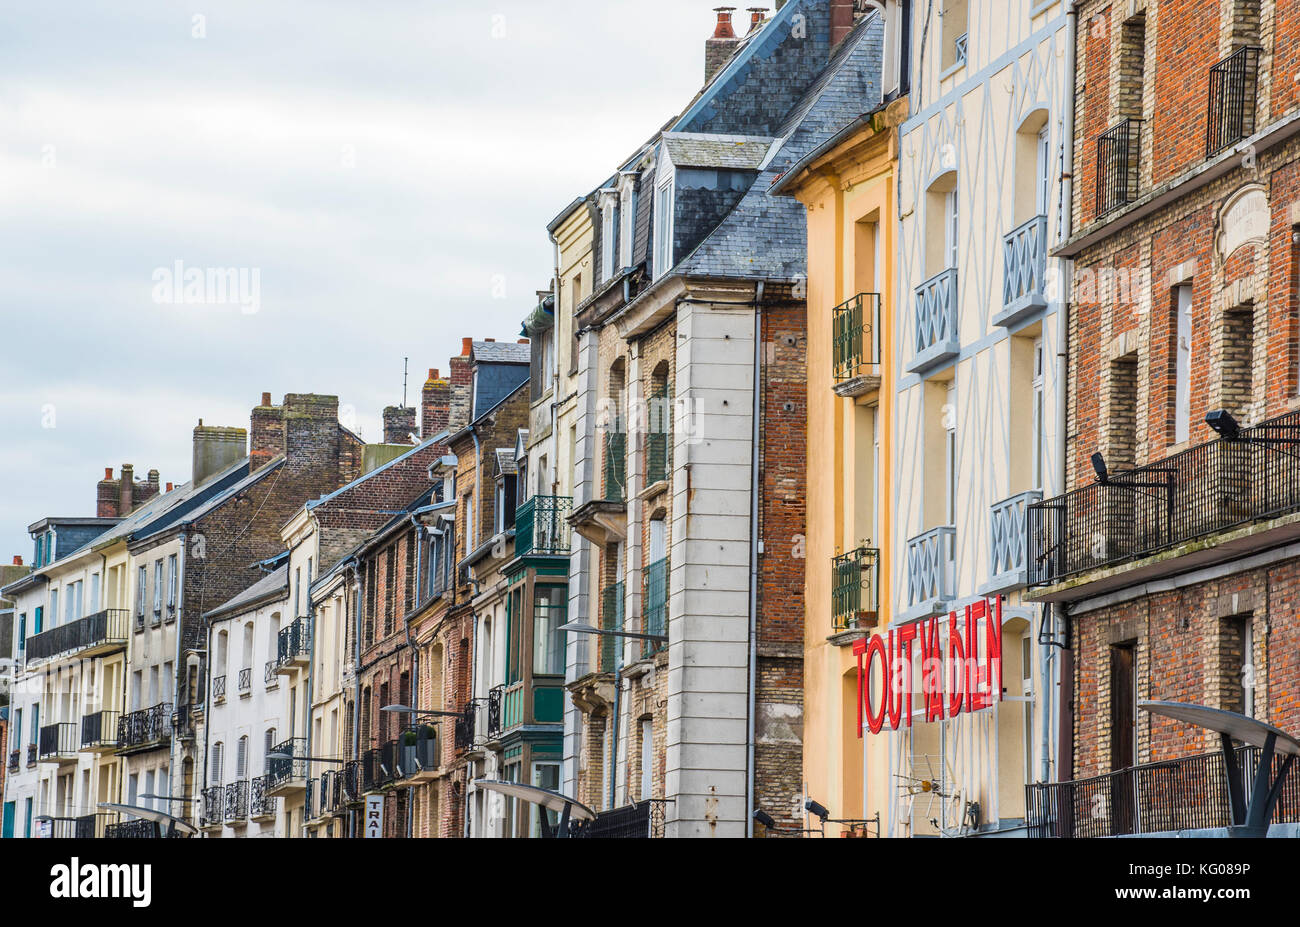 View of a street in Dieppe, France Stock Photo - Alamy